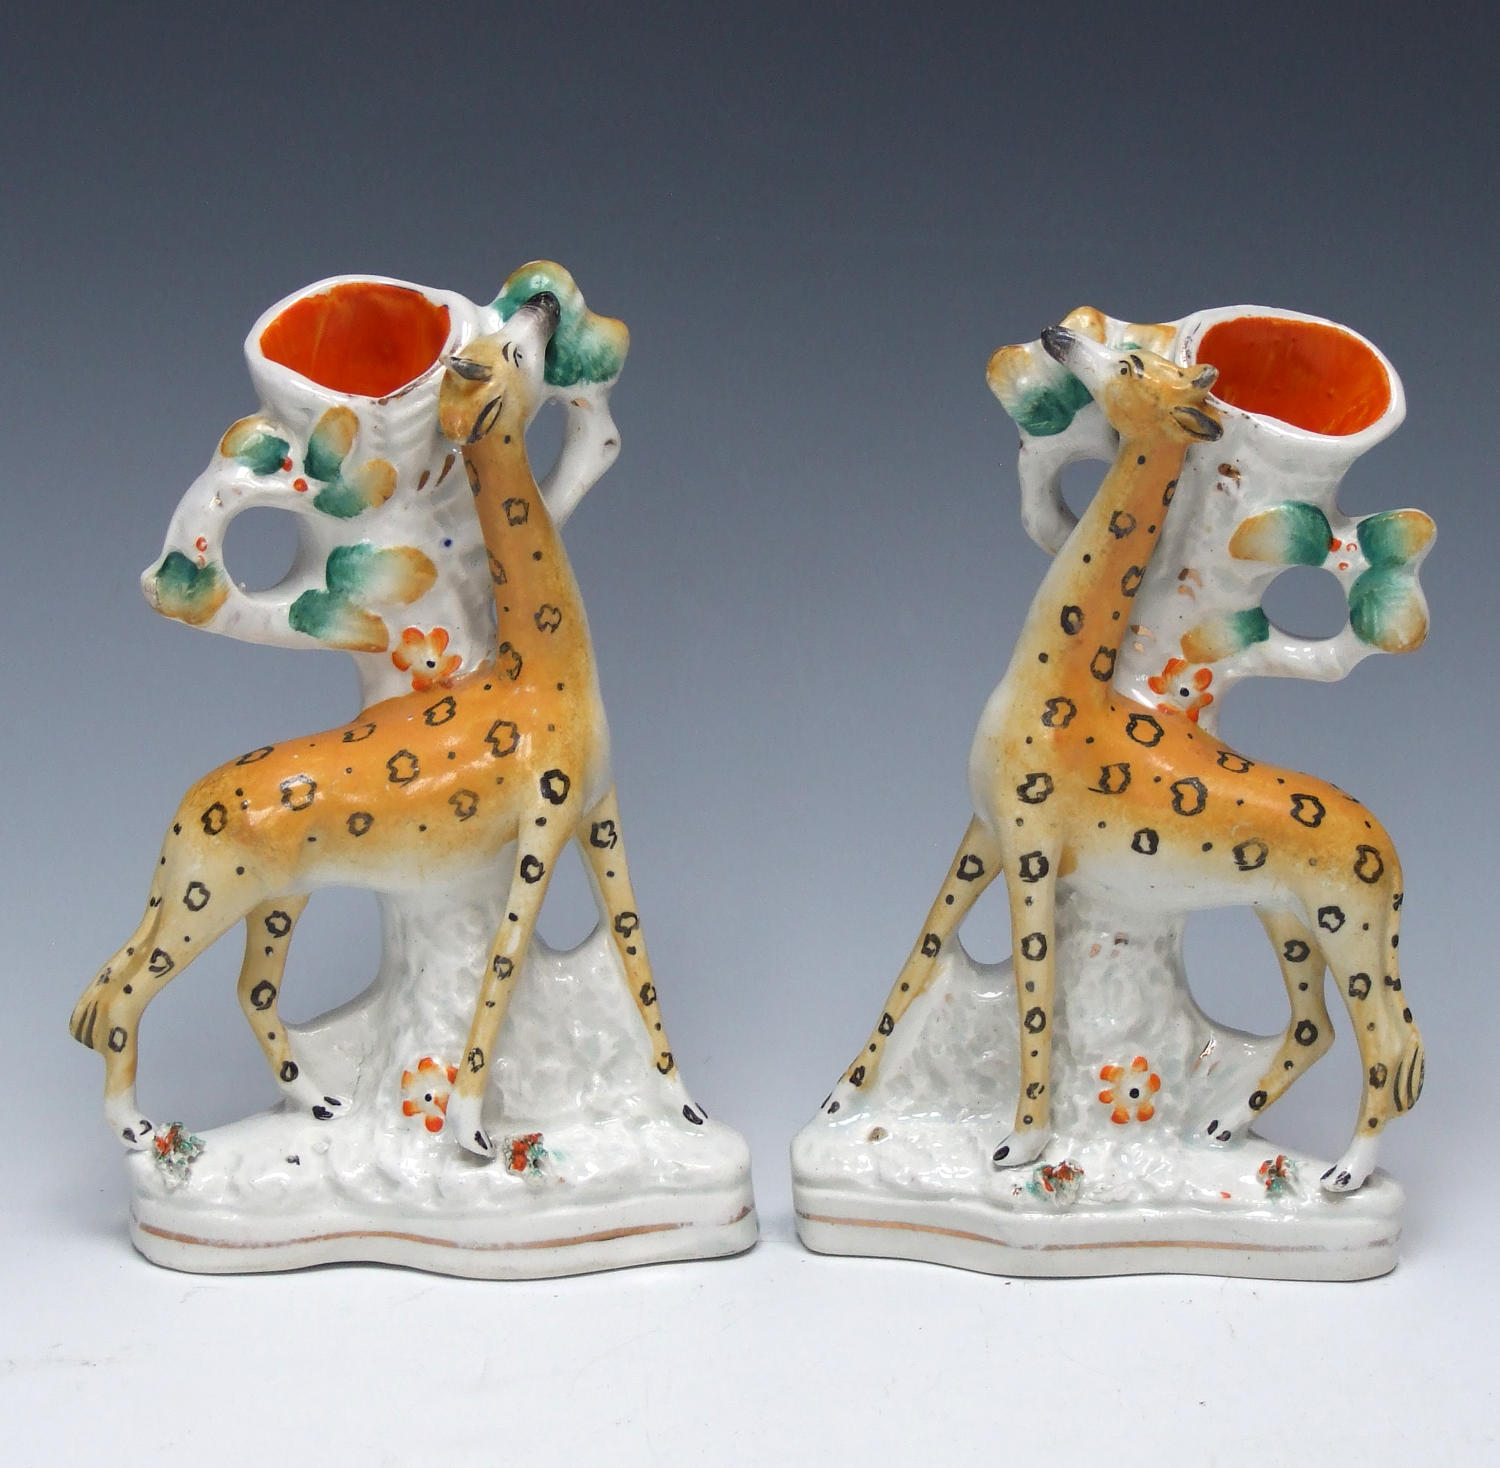 Extremely rare pair of Staffordshire standing giraffe spills